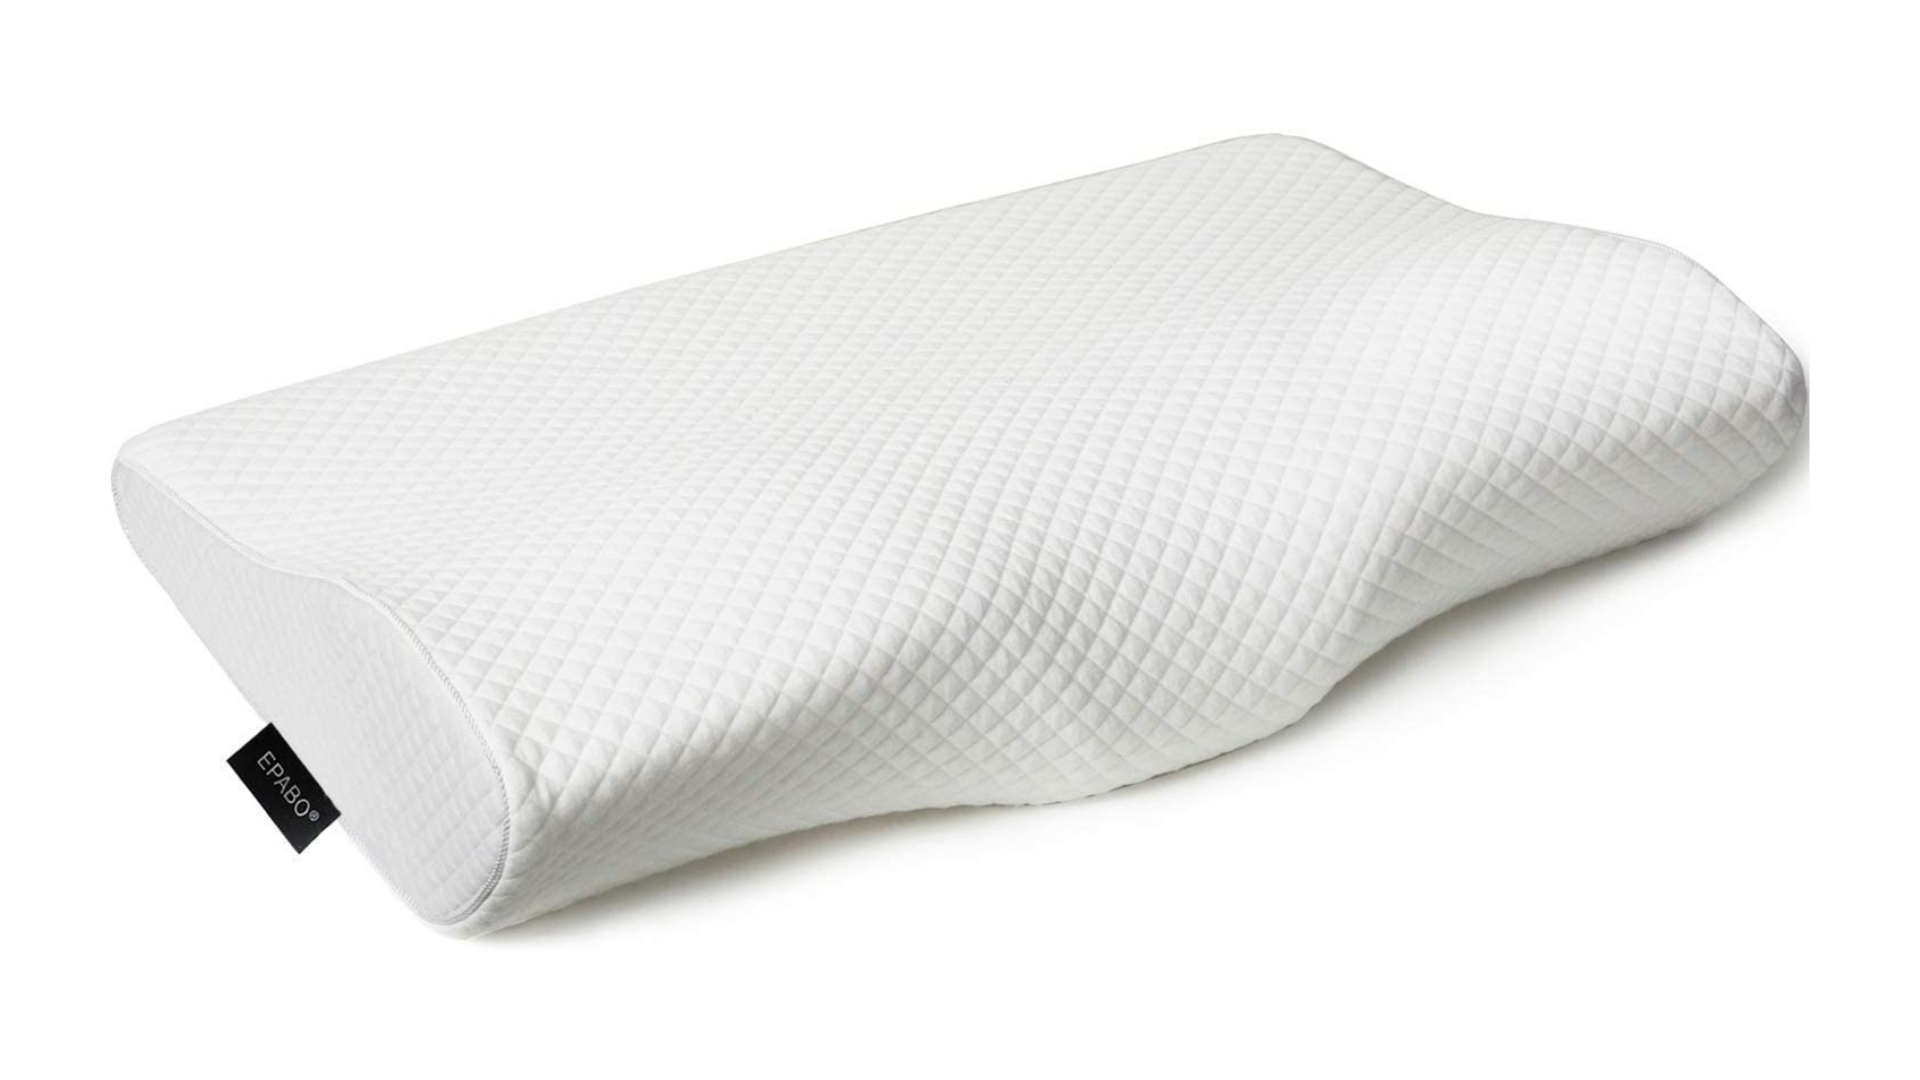 13 Best Pillows for SideSleepers to Relieve Neck and Shoulder Pain